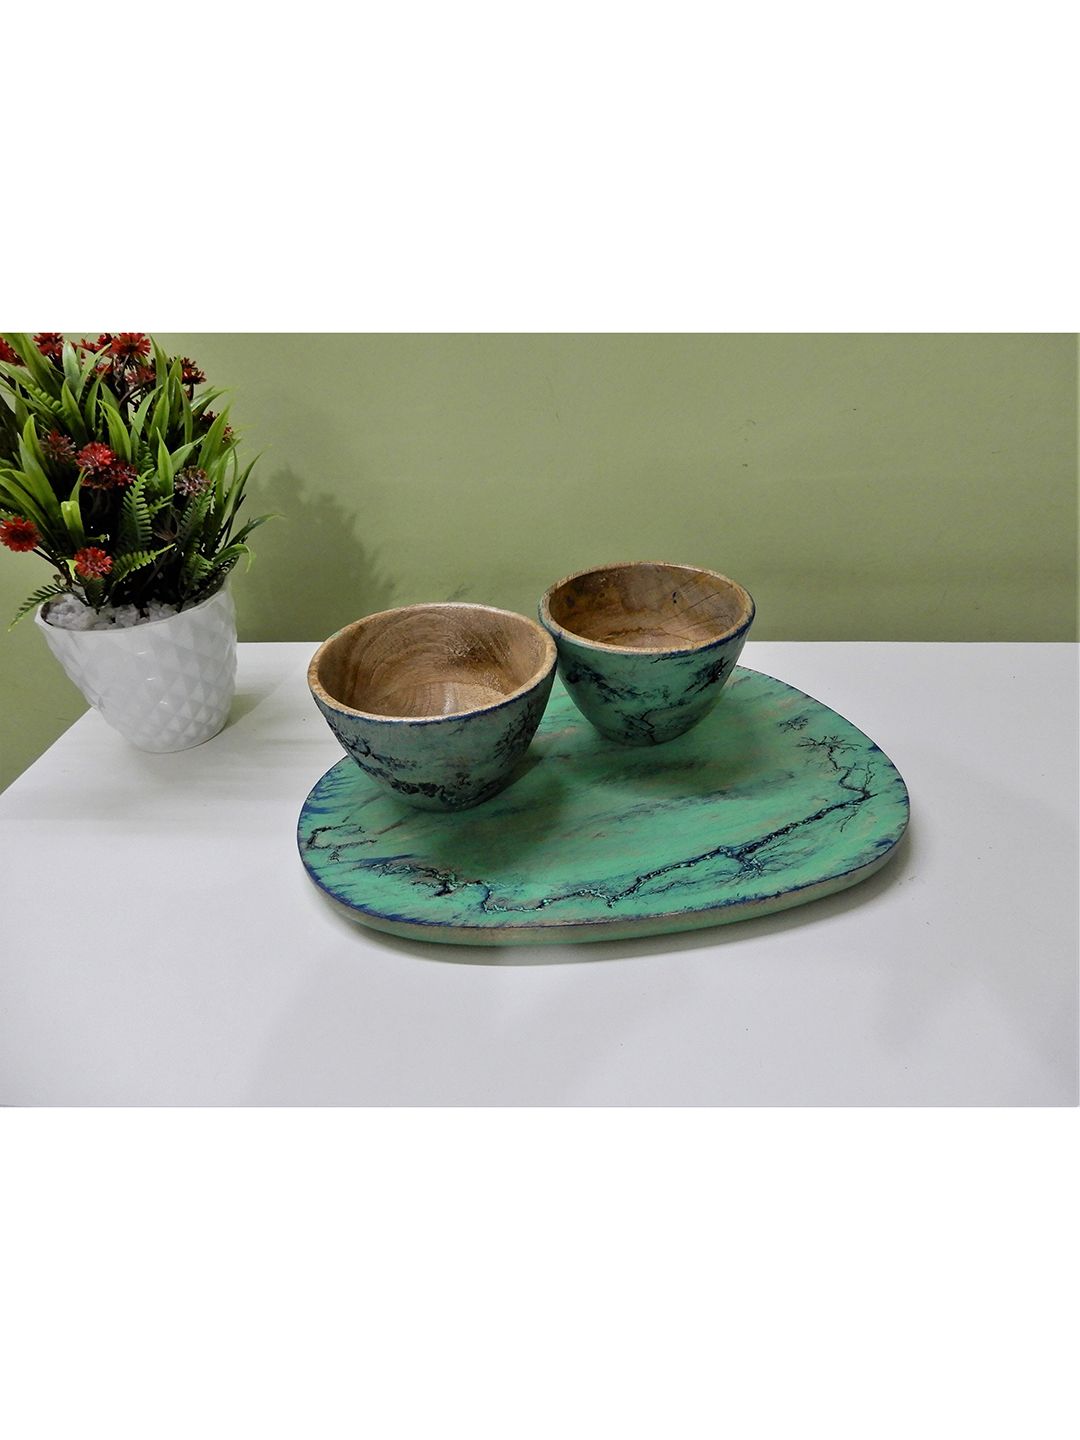 Disoo Fashions Green Solid Wood Oval Shape Tray Cum Platter With 2 Bowls Price in India